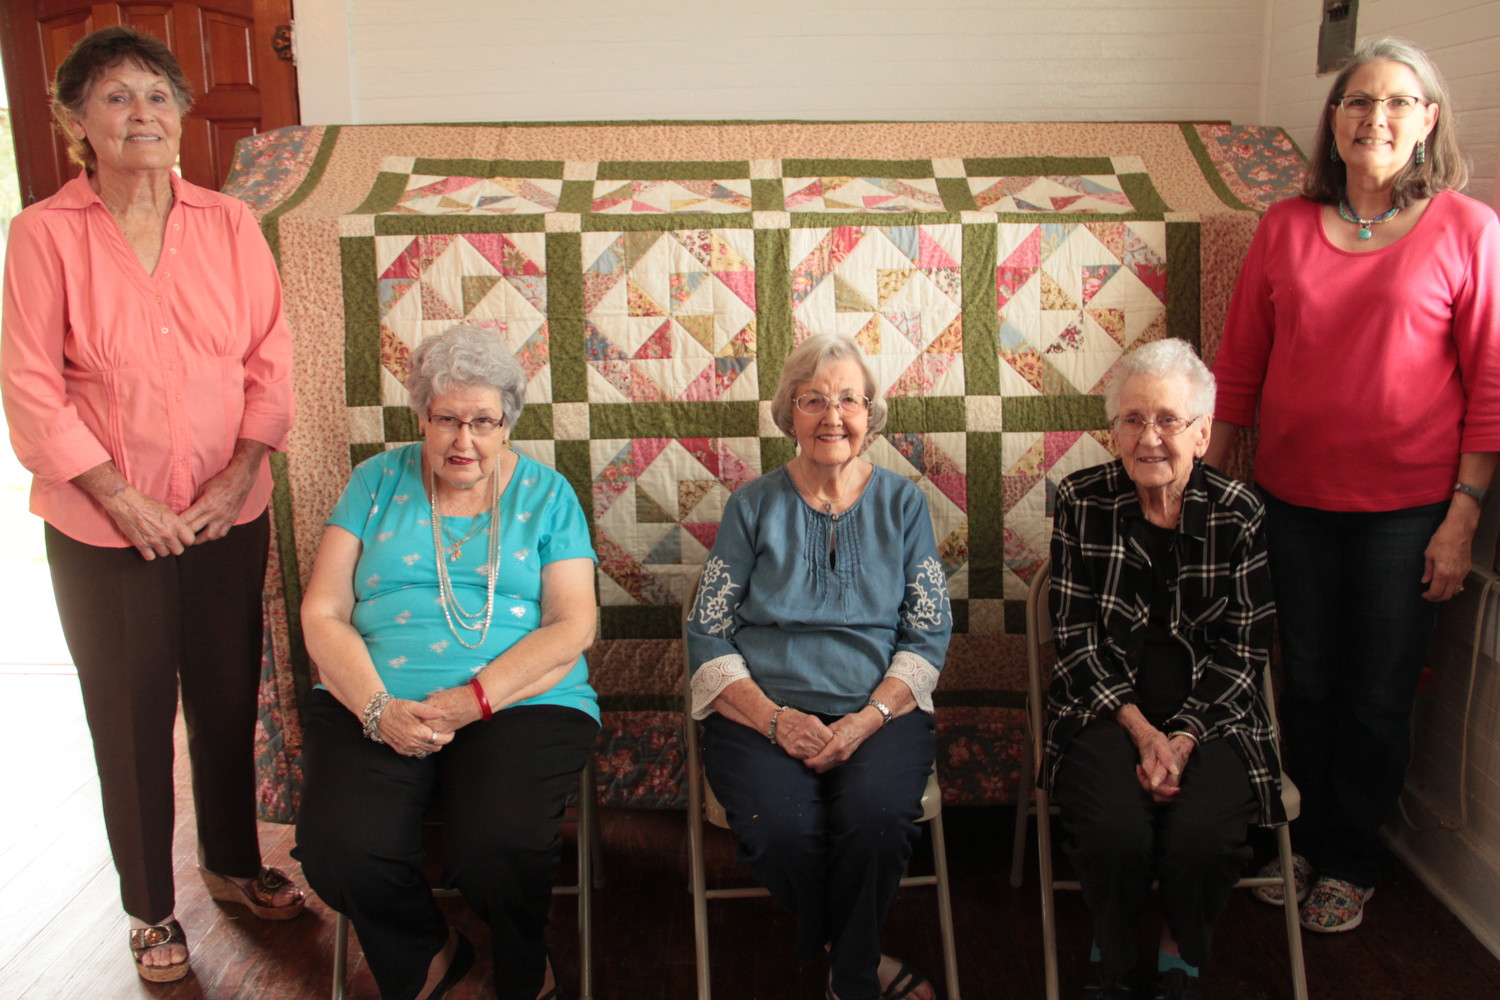 The Happy Quilters are, from left, Margie Rice, Ruth Newberry, Charlene Anderson, Janyce Littlefield, and Terri Porter. You can catch them and their handmade quilt at the Leesville Country Fair on Oct. 13.